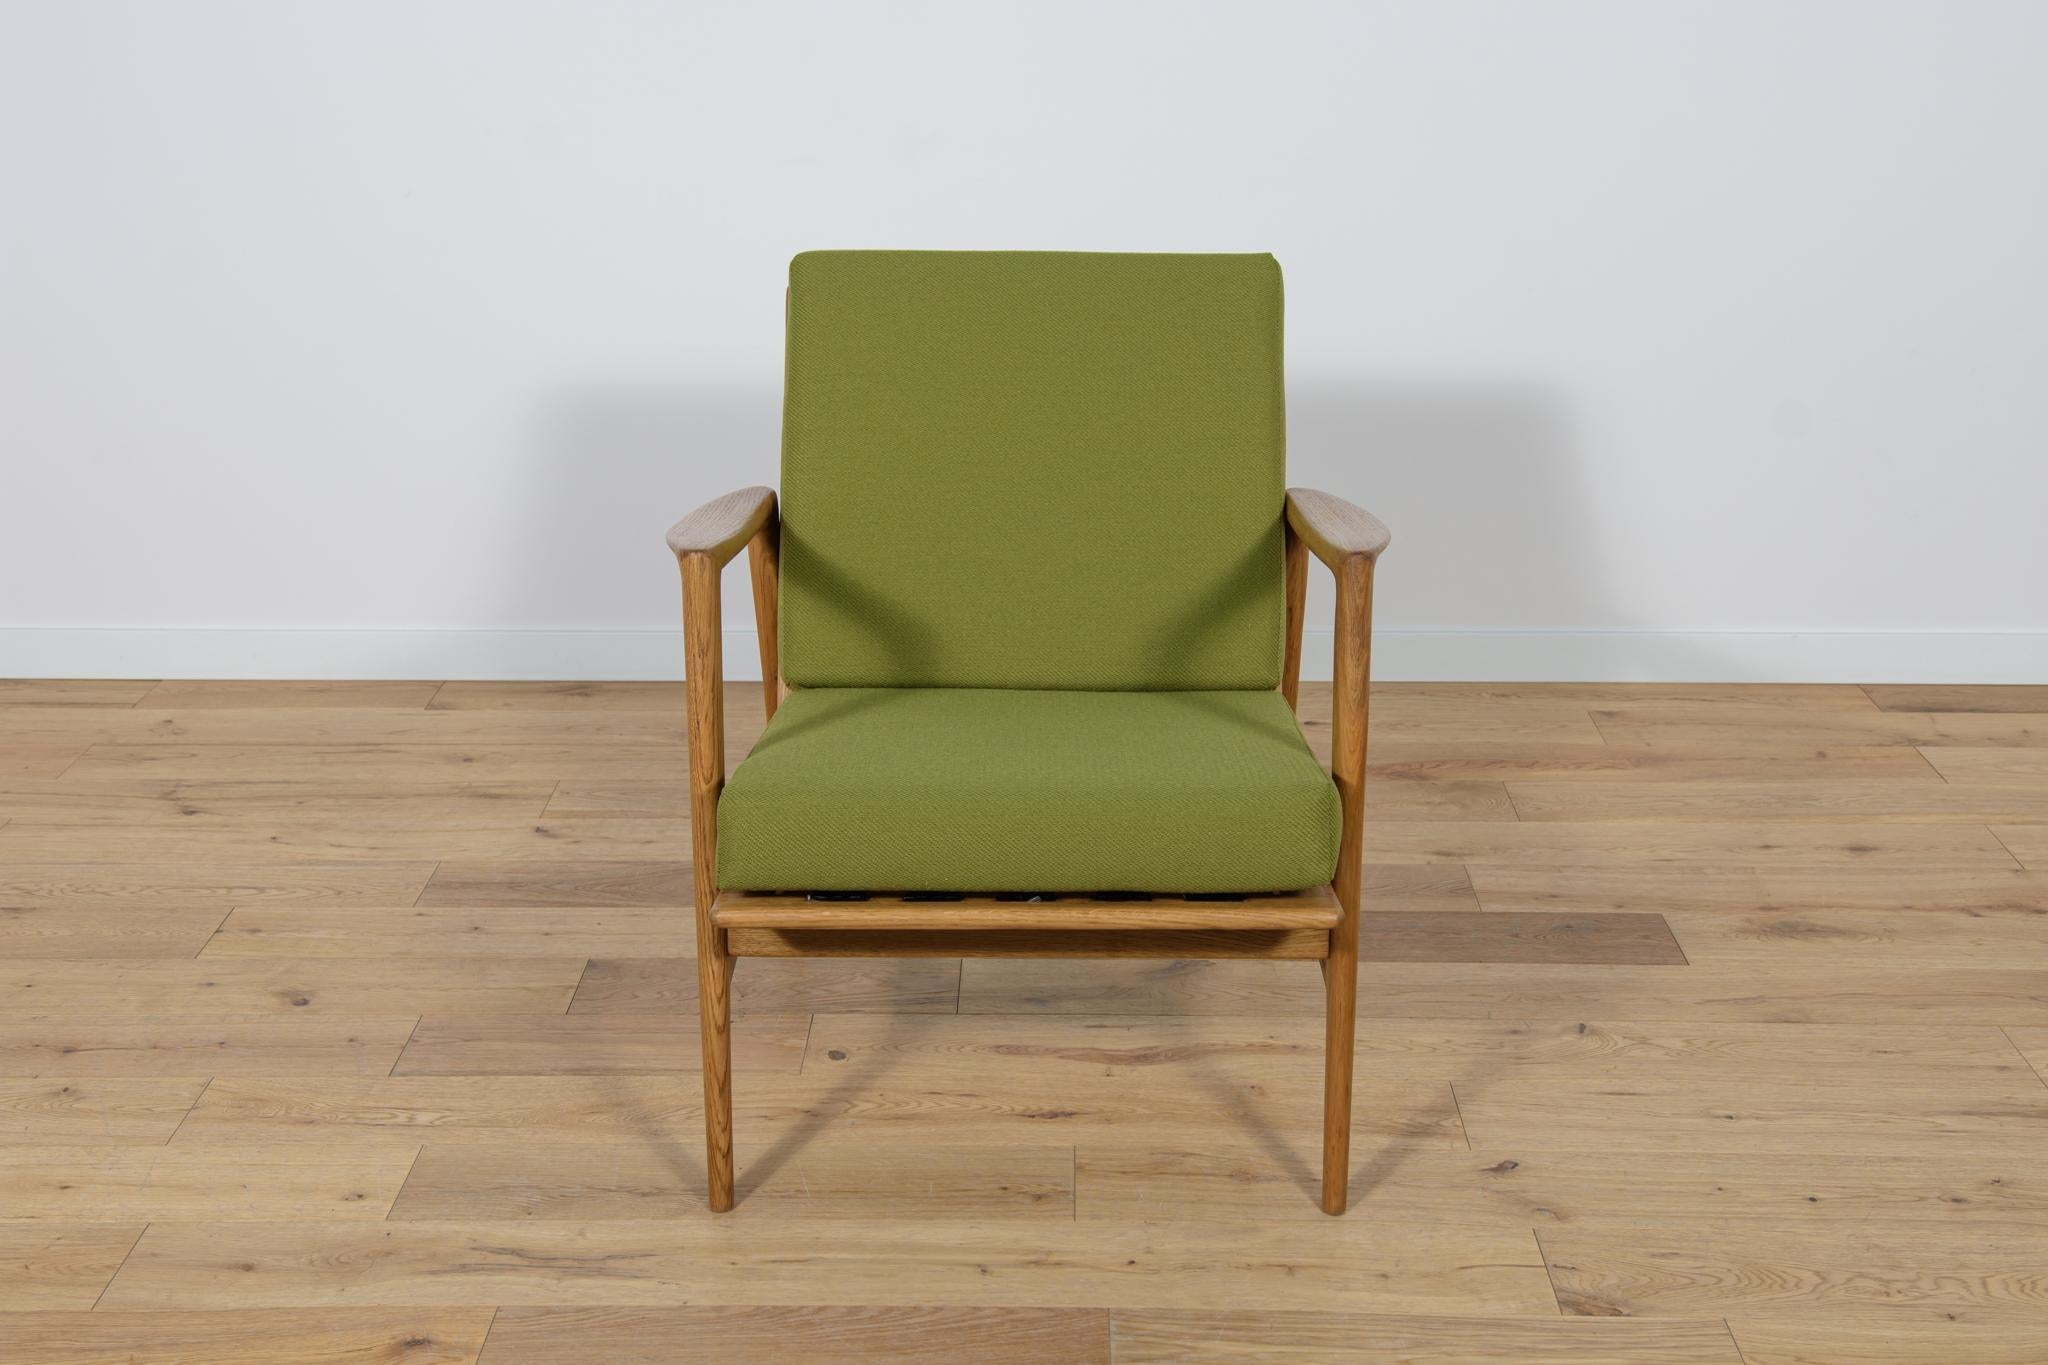 The armchair that was produced by the Polish company Swarzędzka Furniture Factory. Armchair have been professionally restored. The pillows were replaced with new ones, upholstered with high-quality green fabric. The wooden structure has been cleaned